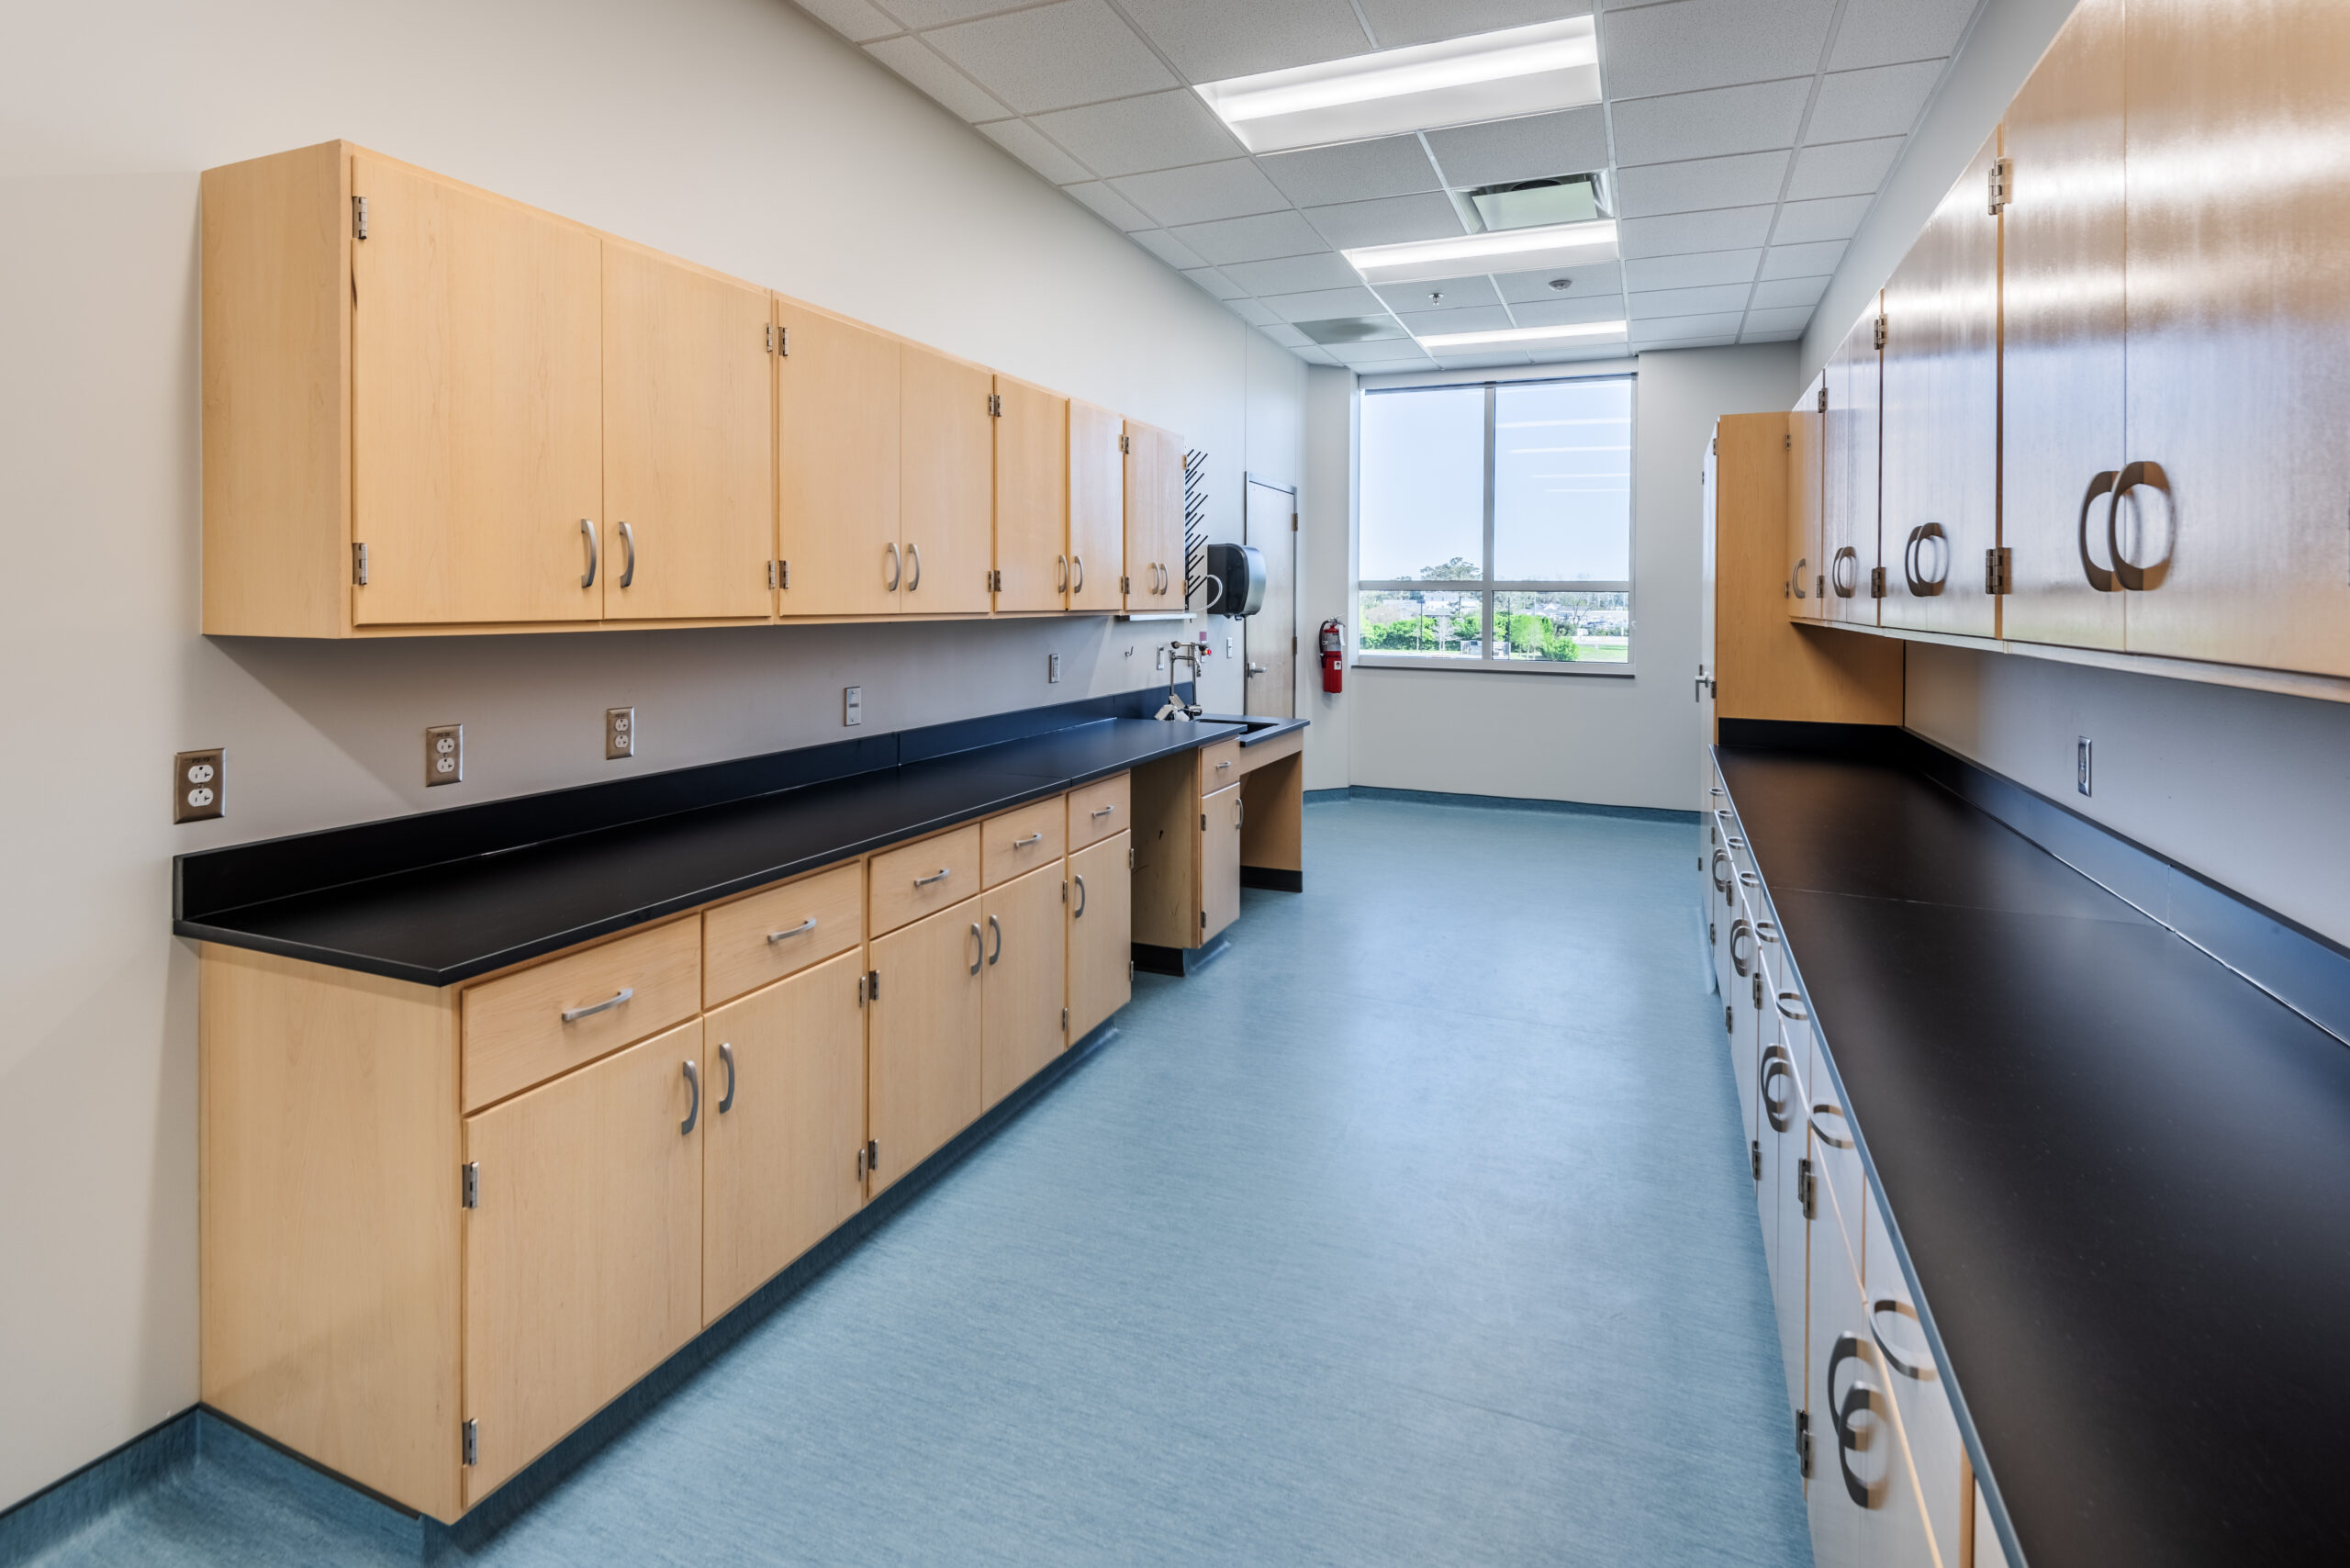 College of the Albemarle Dare County Campus Lab with Cabinets, Counterspace, and Sinks